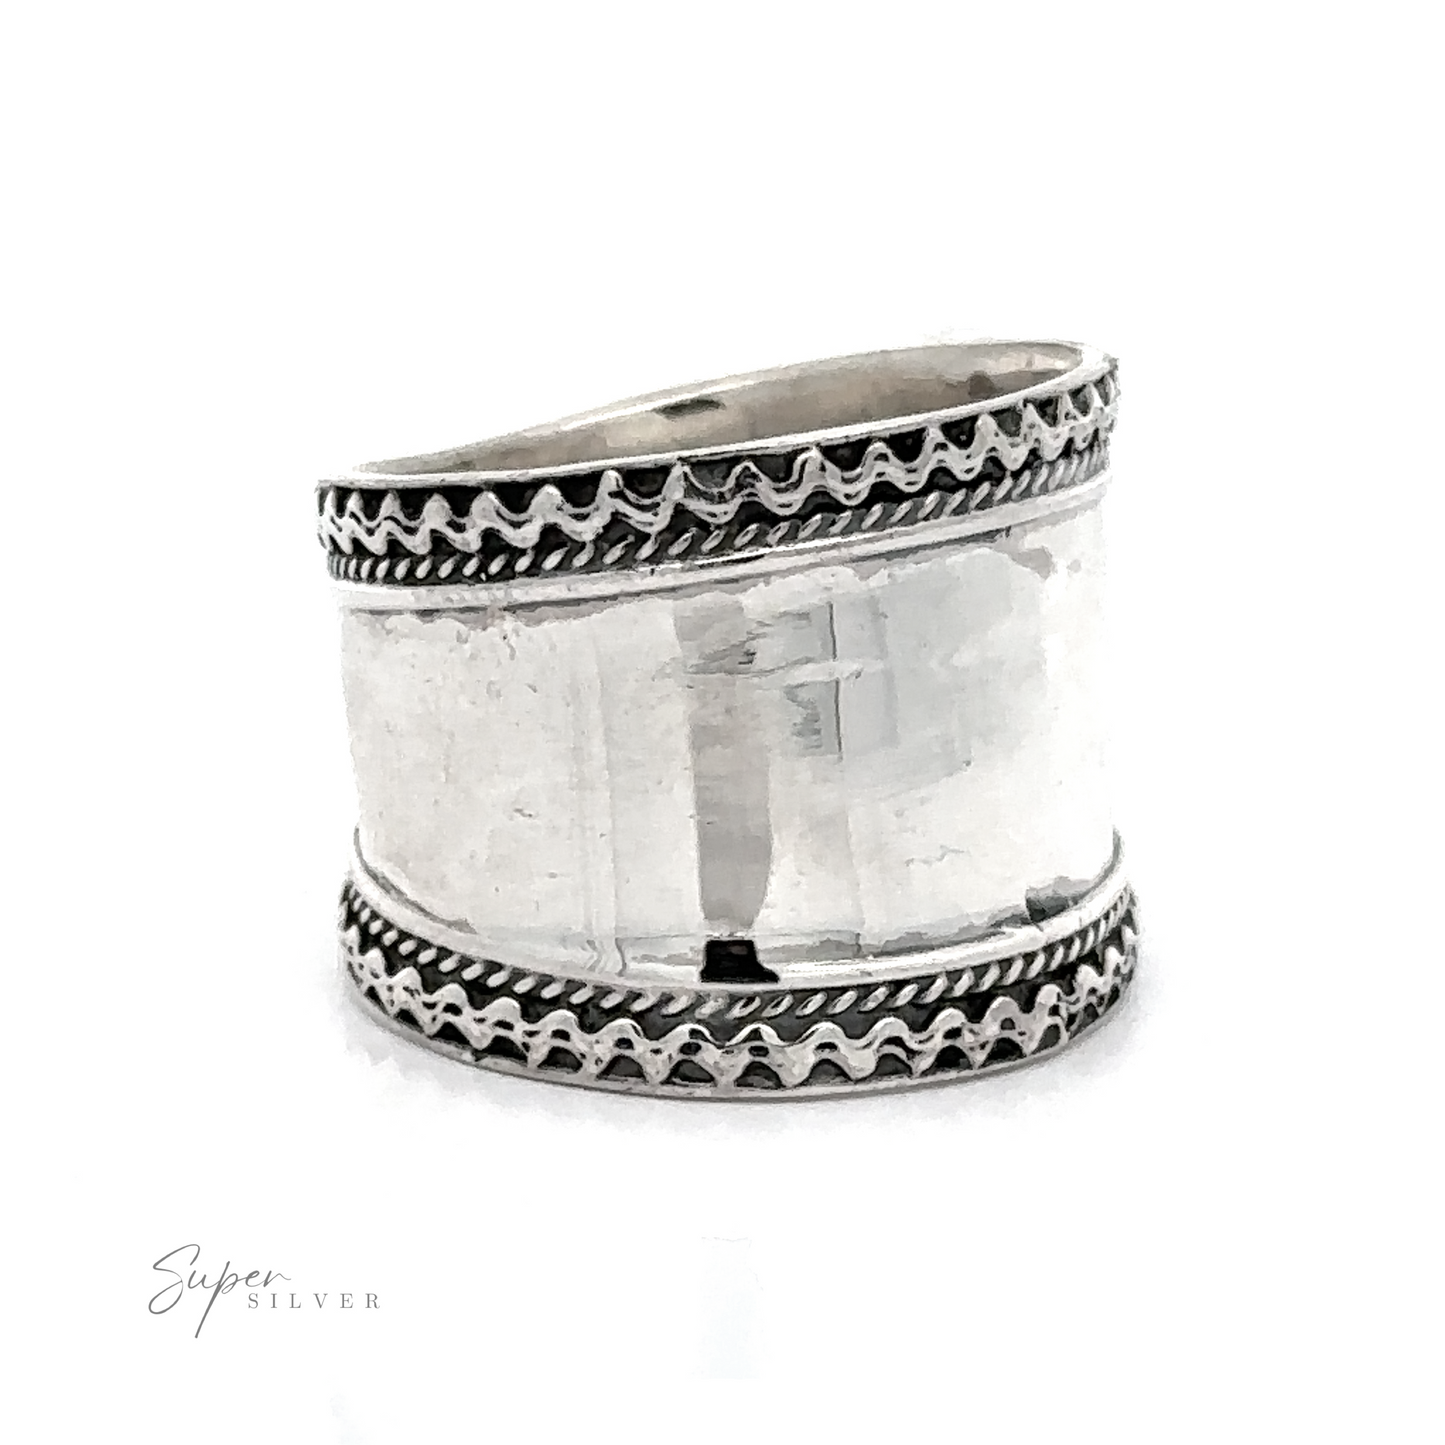 A Wide Silver Band with Etched Border ring with a rope pattern.